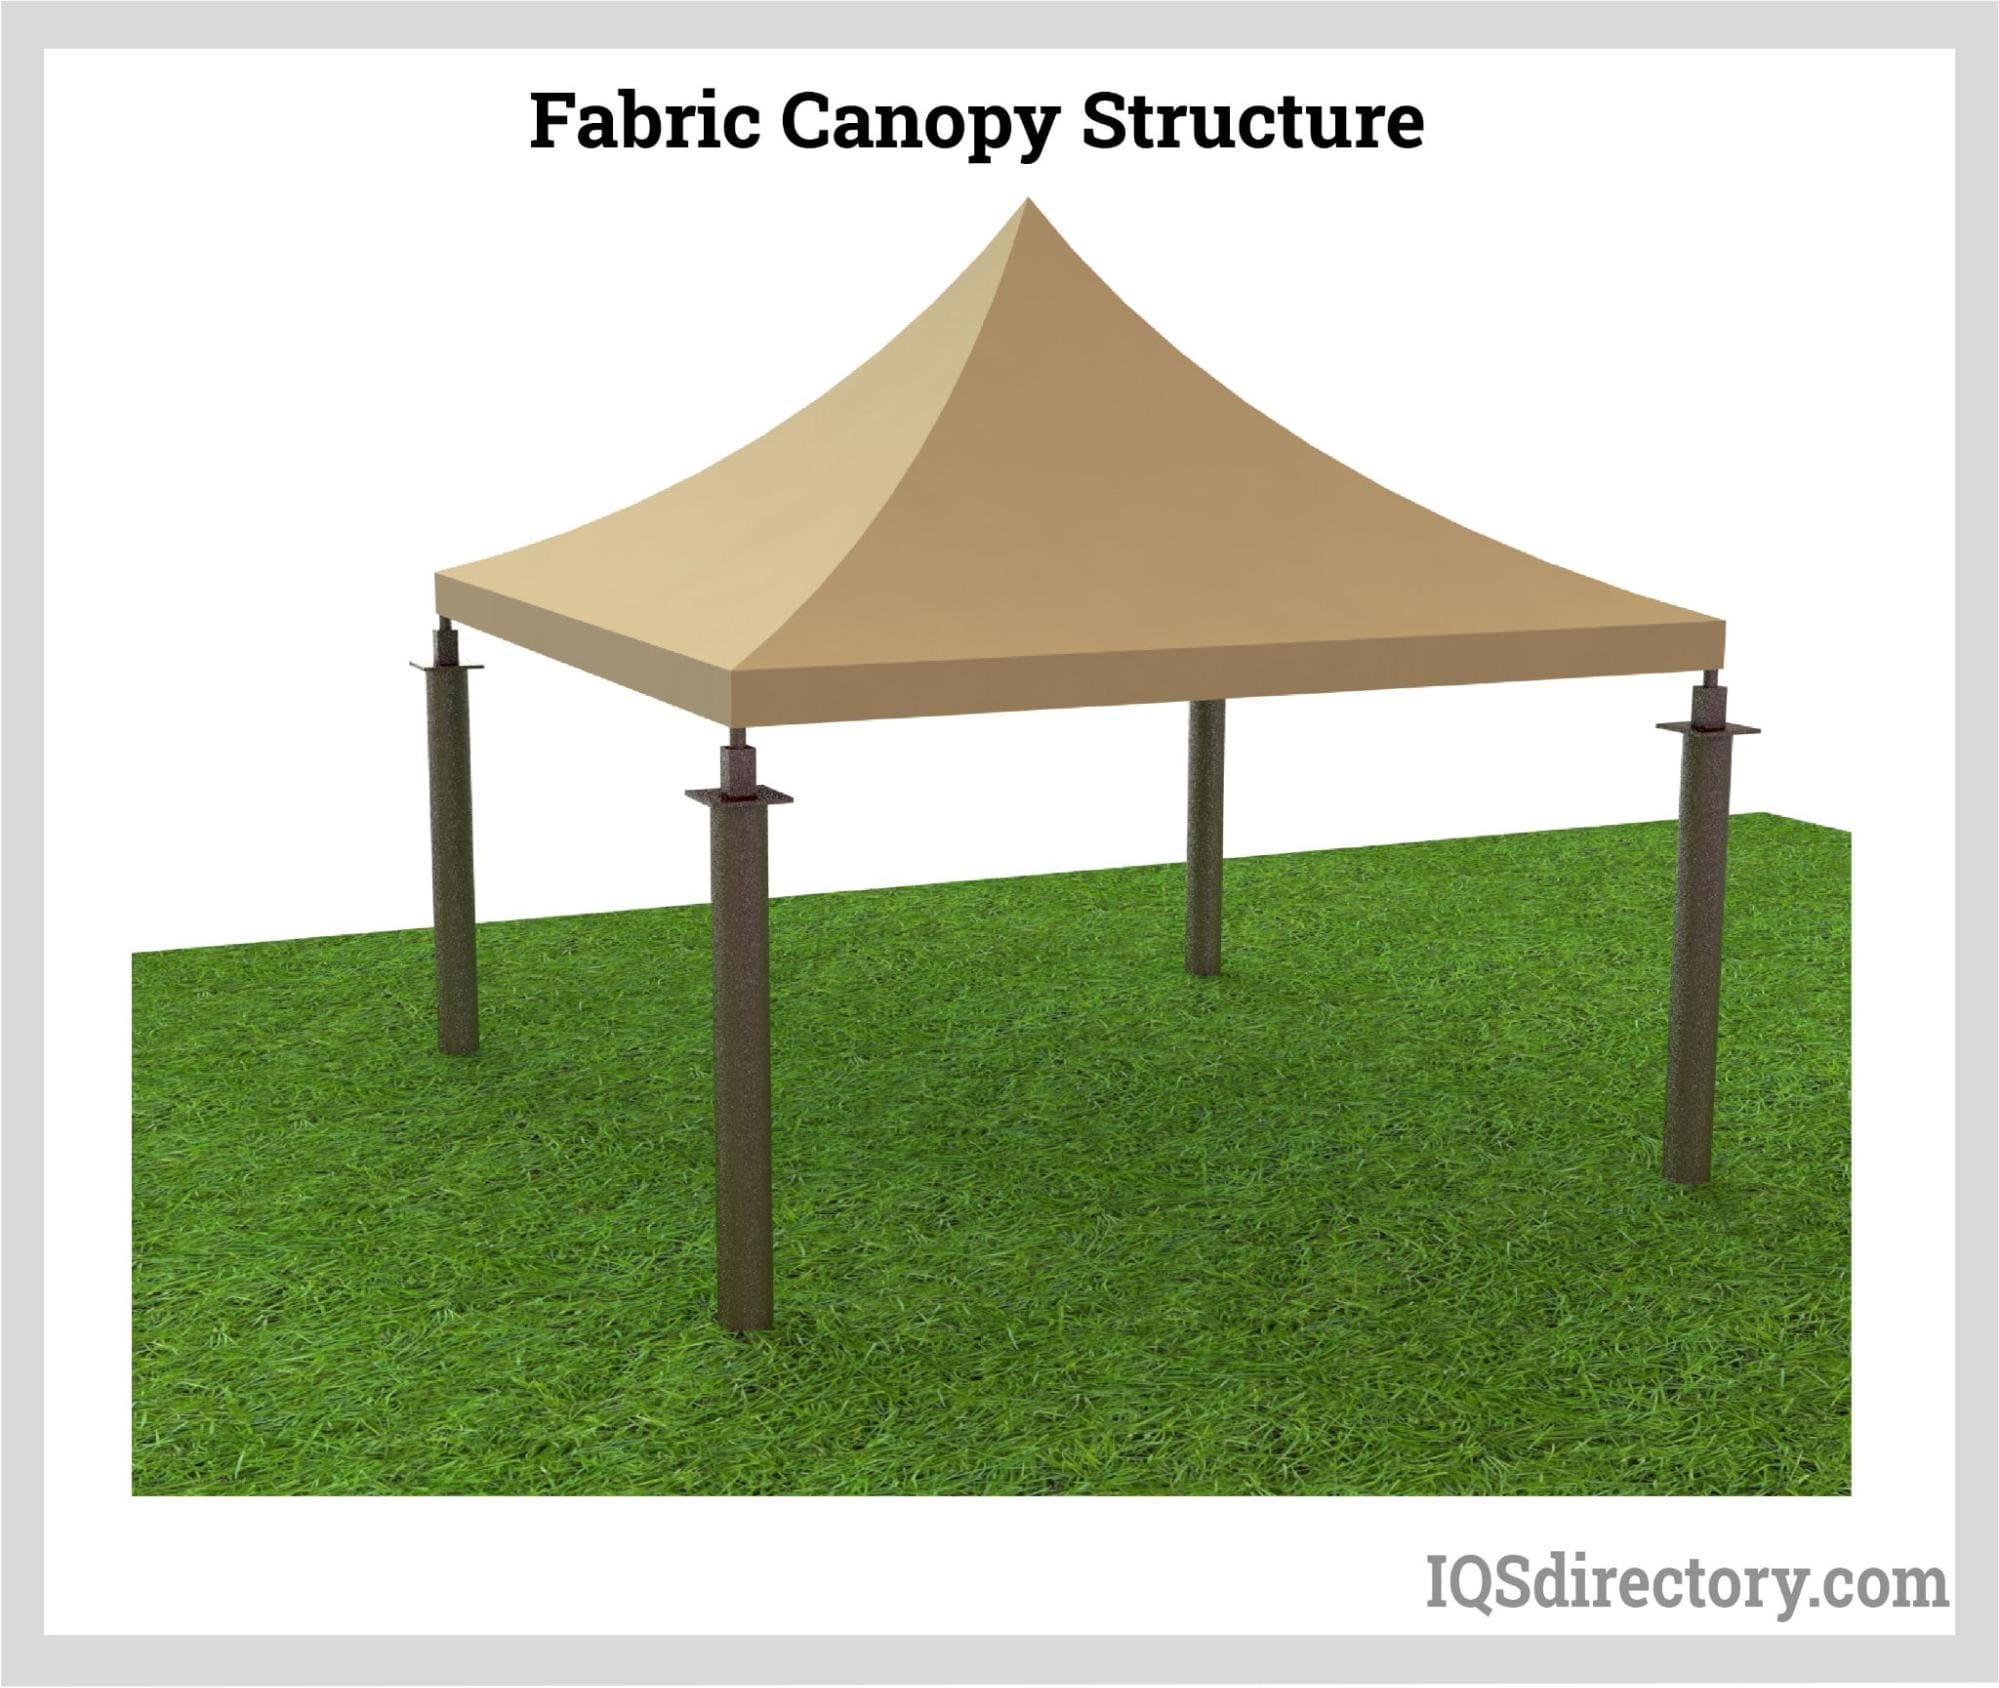 come by and get your canopy green while you still have time! You